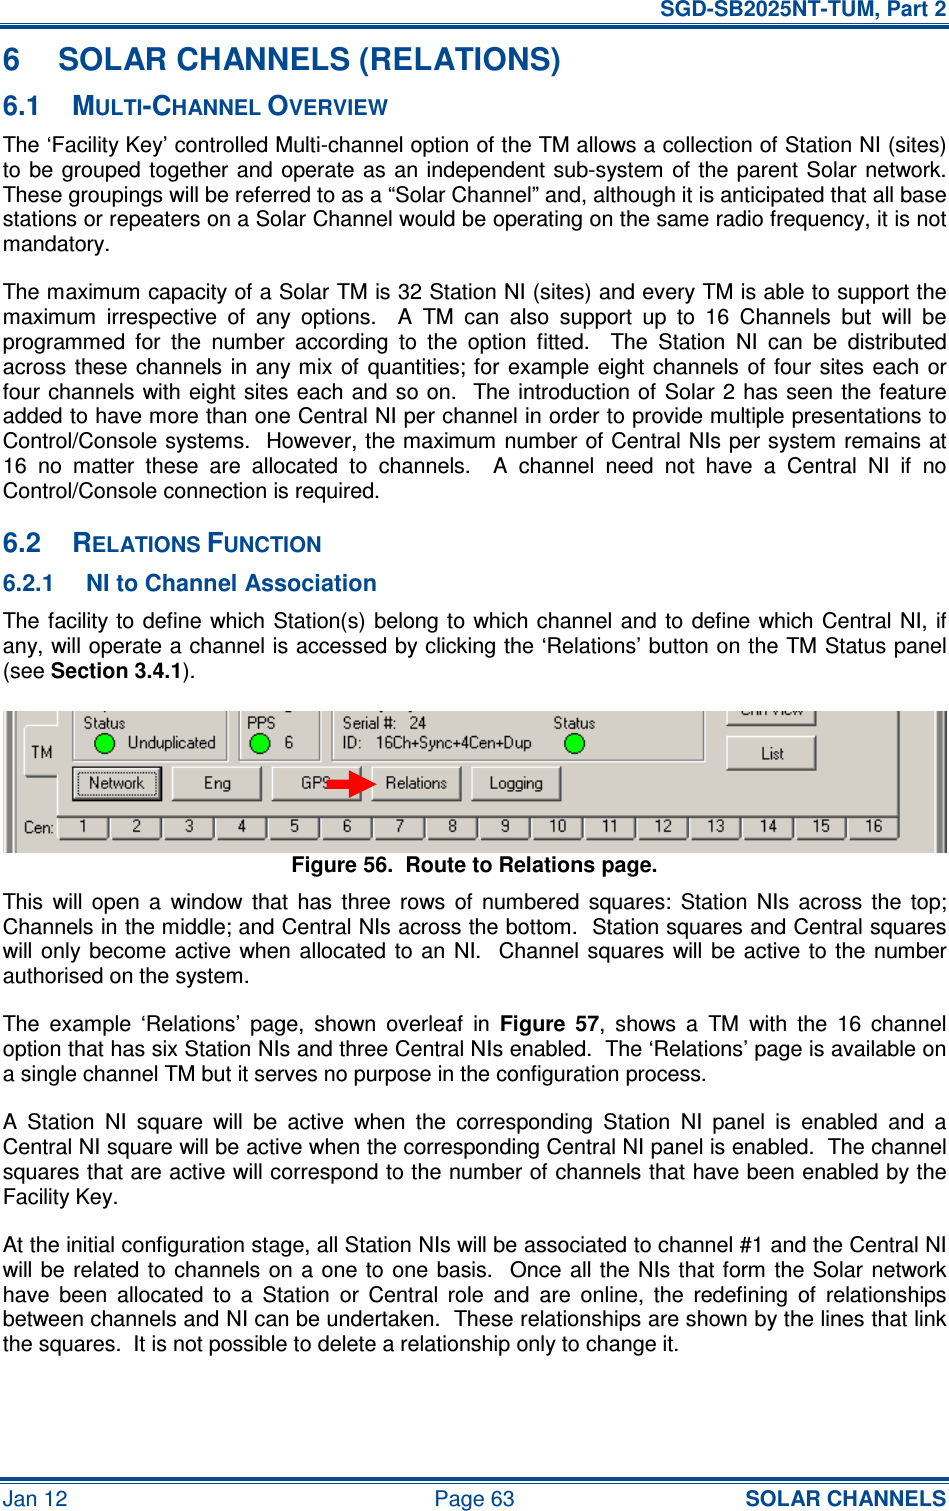   SGD-SB2025NT-TUM, Part 2 Jan 12  Page 63 SOLAR CHANNELS 6  SOLAR CHANNELS (RELATIONS) 6.1  MULTI-CHANNEL OVERVIEW The ‘Facility Key’ controlled Multi-channel option of the TM allows a collection of Station NI (sites) to be  grouped  together and  operate  as an independent  sub-system  of  the parent  Solar  network.  These groupings will be referred to as a “Solar Channel” and, although it is anticipated that all base stations or repeaters on a Solar Channel would be operating on the same radio frequency, it is not mandatory. The maximum capacity of a Solar TM is 32 Station NI (sites) and every TM is able to support the maximum  irrespective  of  any  options.    A  TM  can  also  support  up  to  16  Channels  but  will  be programmed  for  the  number  according  to  the  option  fitted.    The  Station  NI  can  be  distributed across these channels  in any mix  of quantities; for example eight channels of four sites  each  or four channels with eight  sites each  and so on.  The introduction of Solar 2 has seen  the feature added to have more than one Central NI per channel in order to provide multiple presentations to Control/Console systems.  However, the maximum number of Central NIs per system remains at 16  no  matter  these  are  allocated  to  channels.    A  channel  need  not  have  a  Central  NI  if  no Control/Console connection is required. 6.2  RELATIONS FUNCTION 6.2.1  NI to Channel Association The facility to  define which Station(s) belong to  which channel and  to  define  which Central NI, if any, will operate a channel is accessed by clicking the ‘Relations’ button on the TM Status panel (see Section 3.4.1). Figure 56.  Route to Relations page. This  will  open  a  window  that  has  three  rows  of  numbered  squares:  Station  NIs  across  the  top; Channels in the middle; and Central NIs across the bottom.  Station squares and Central squares will only  become  active when allocated  to  an  NI.    Channel squares  will  be  active to  the  number authorised on the system. The  example  ‘Relations’  page,  shown  overleaf  in Figure  57,  shows  a  TM  with  the  16  channel option that has six Station NIs and three Central NIs enabled.  The ‘Relations’ page is available on a single channel TM but it serves no purpose in the configuration process. A  Station  NI  square  will  be  active  when  the  corresponding  Station  NI  panel  is  enabled  and  a Central NI square will be active when the corresponding Central NI panel is enabled.  The channel squares that are active will correspond to the number of channels that have been enabled by the Facility Key. At the initial configuration stage, all Station NIs will be associated to channel #1 and the Central NI will be  related  to channels on  a one to  one  basis.    Once  all  the NIs that form  the  Solar  network have  been  allocated  to  a  Station  or  Central  role  and  are  online,  the  redefining  of  relationships between channels and NI can be undertaken.  These relationships are shown by the lines that link the squares.  It is not possible to delete a relationship only to change it. 